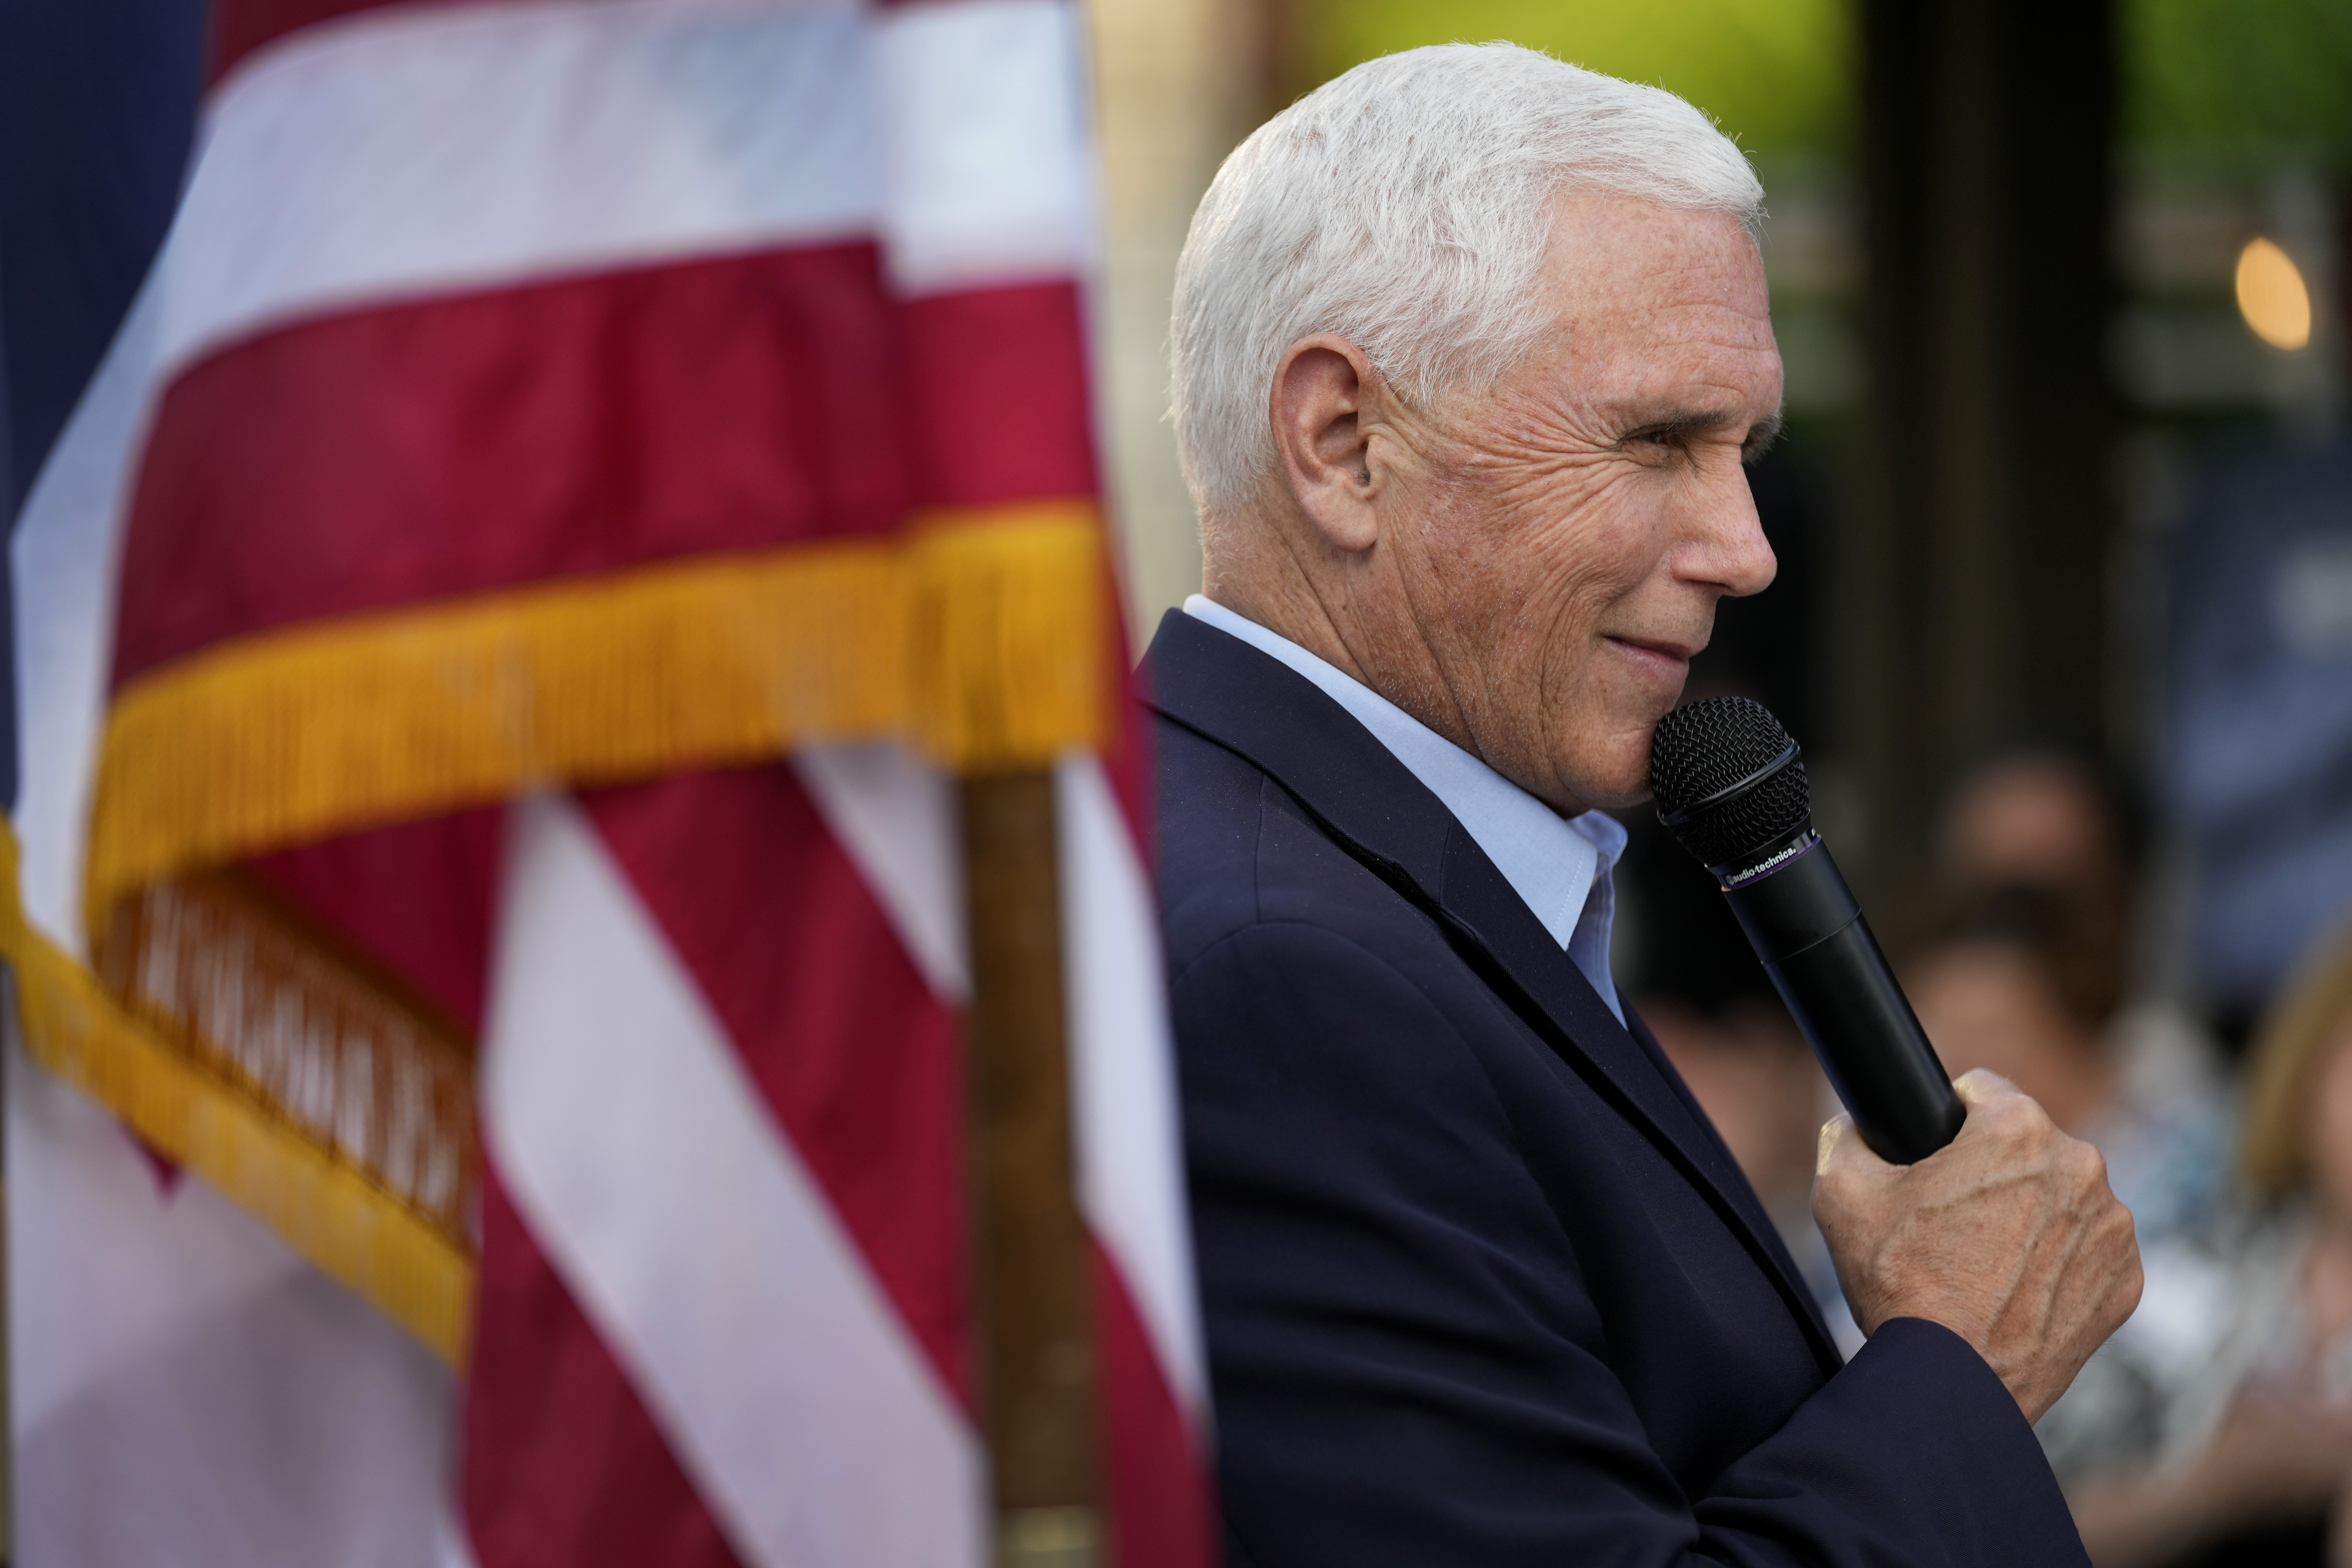 Pence kicks off U.S. presidential bid: ‘Different times call for different leadership’